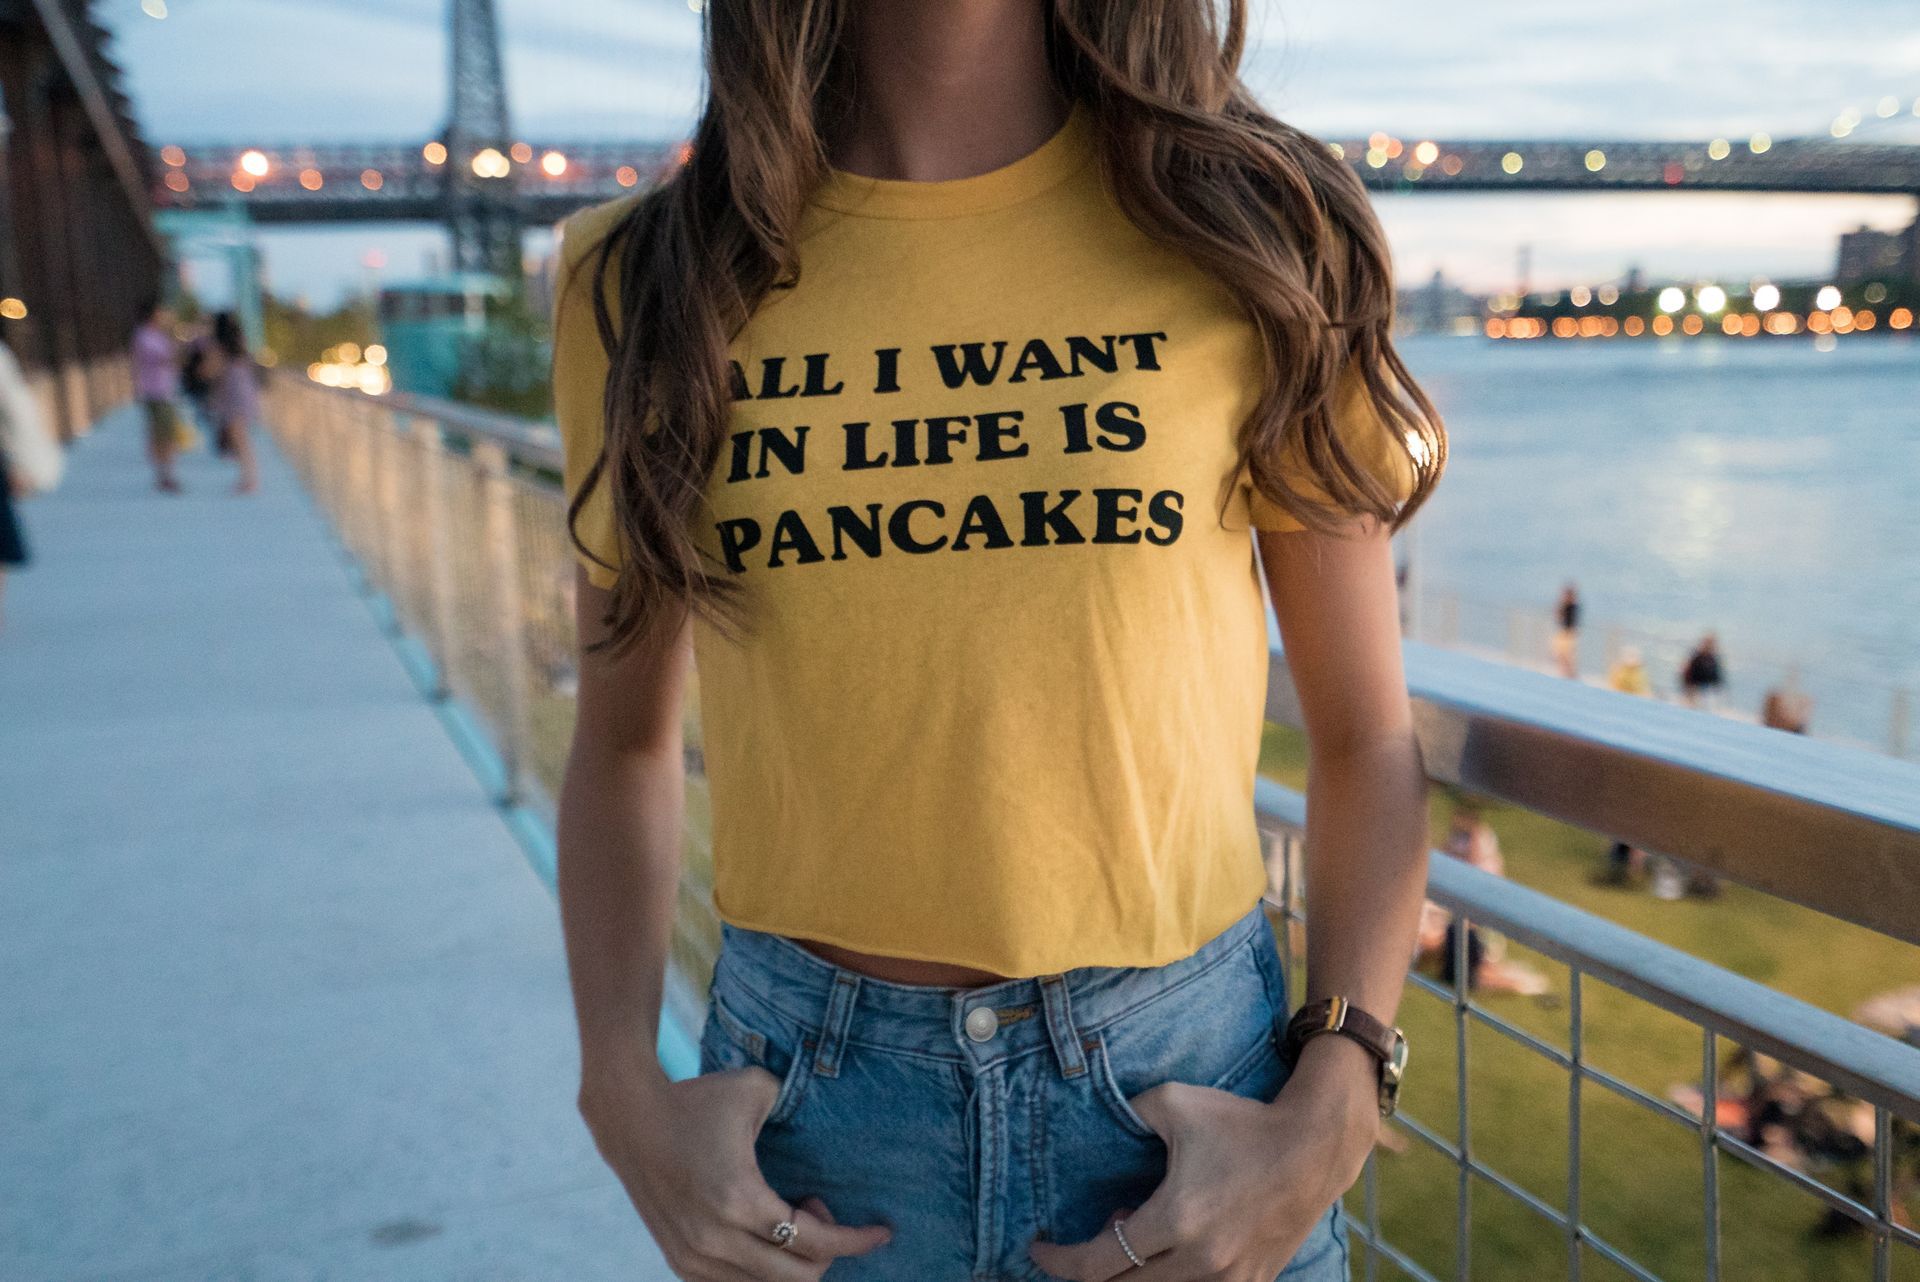 The rise of confidence: How humorous shirt phrases empower individuals